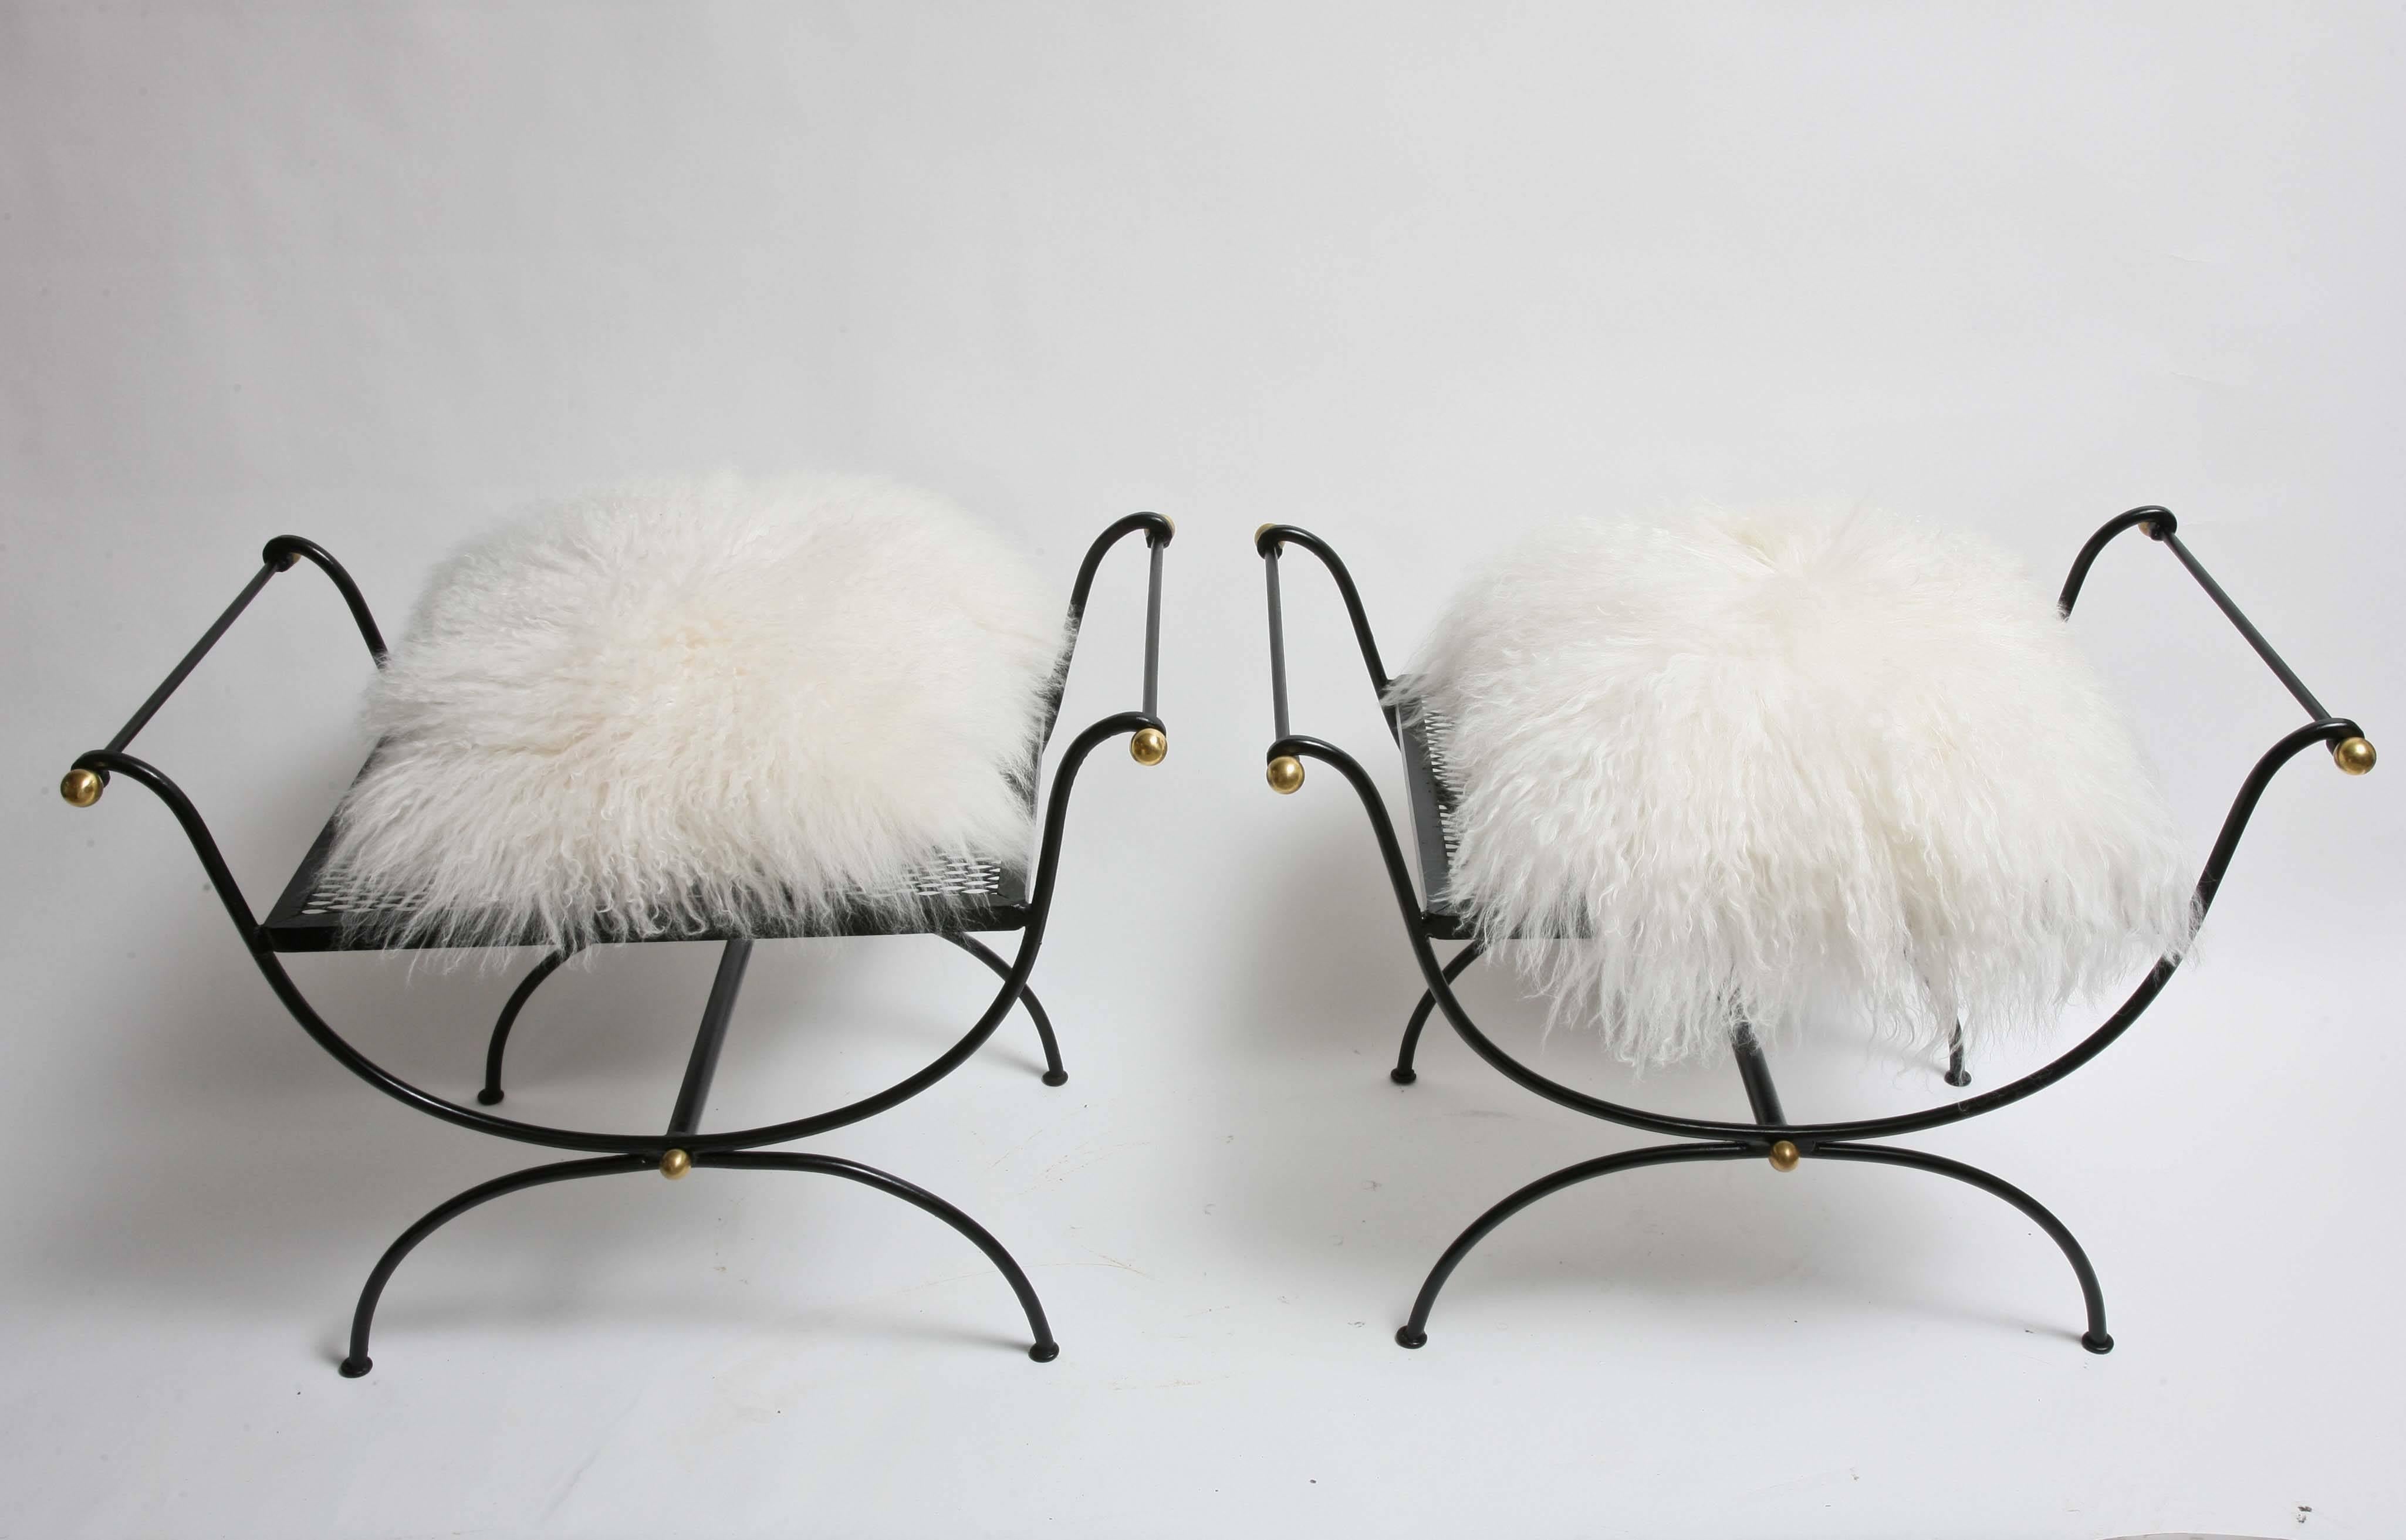 Iron construction with painted black finish and brass accent ball tips. Loose cushions in white long hair real fur.